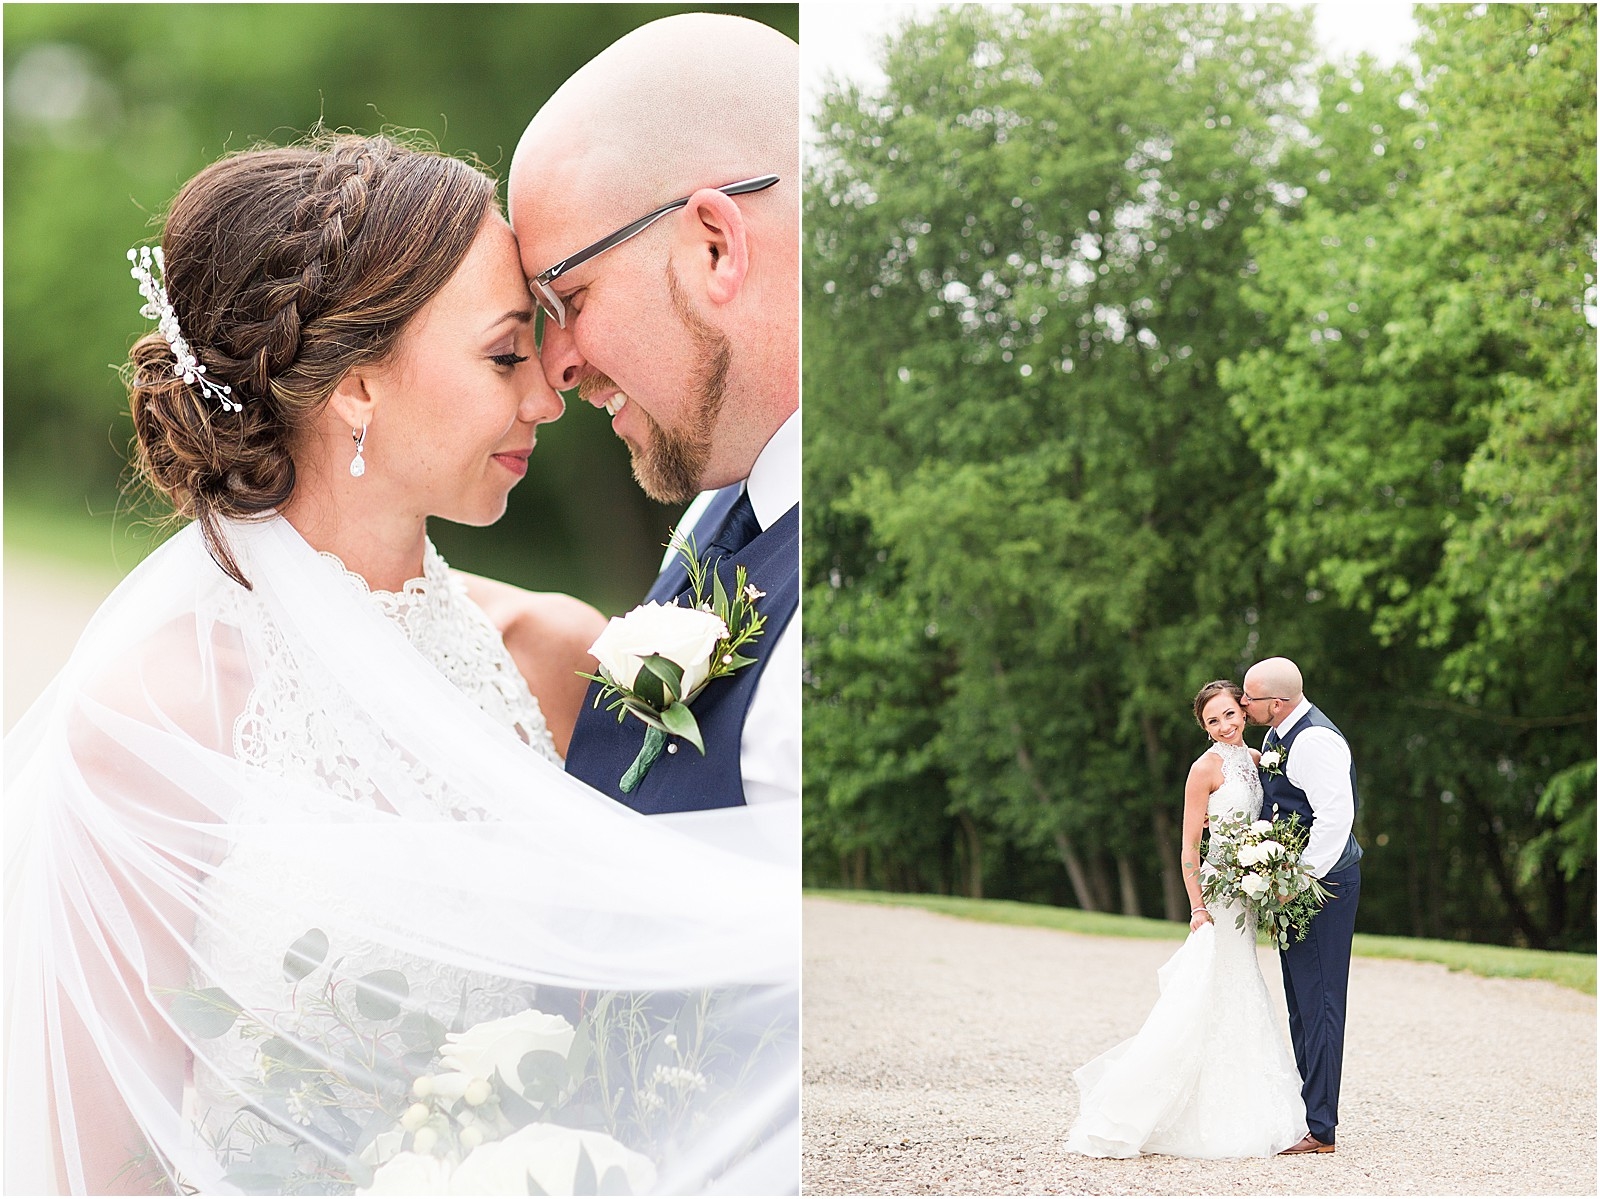 The Corner House Bed and Breakfast Wedding | Meagan and Michael093.jpg